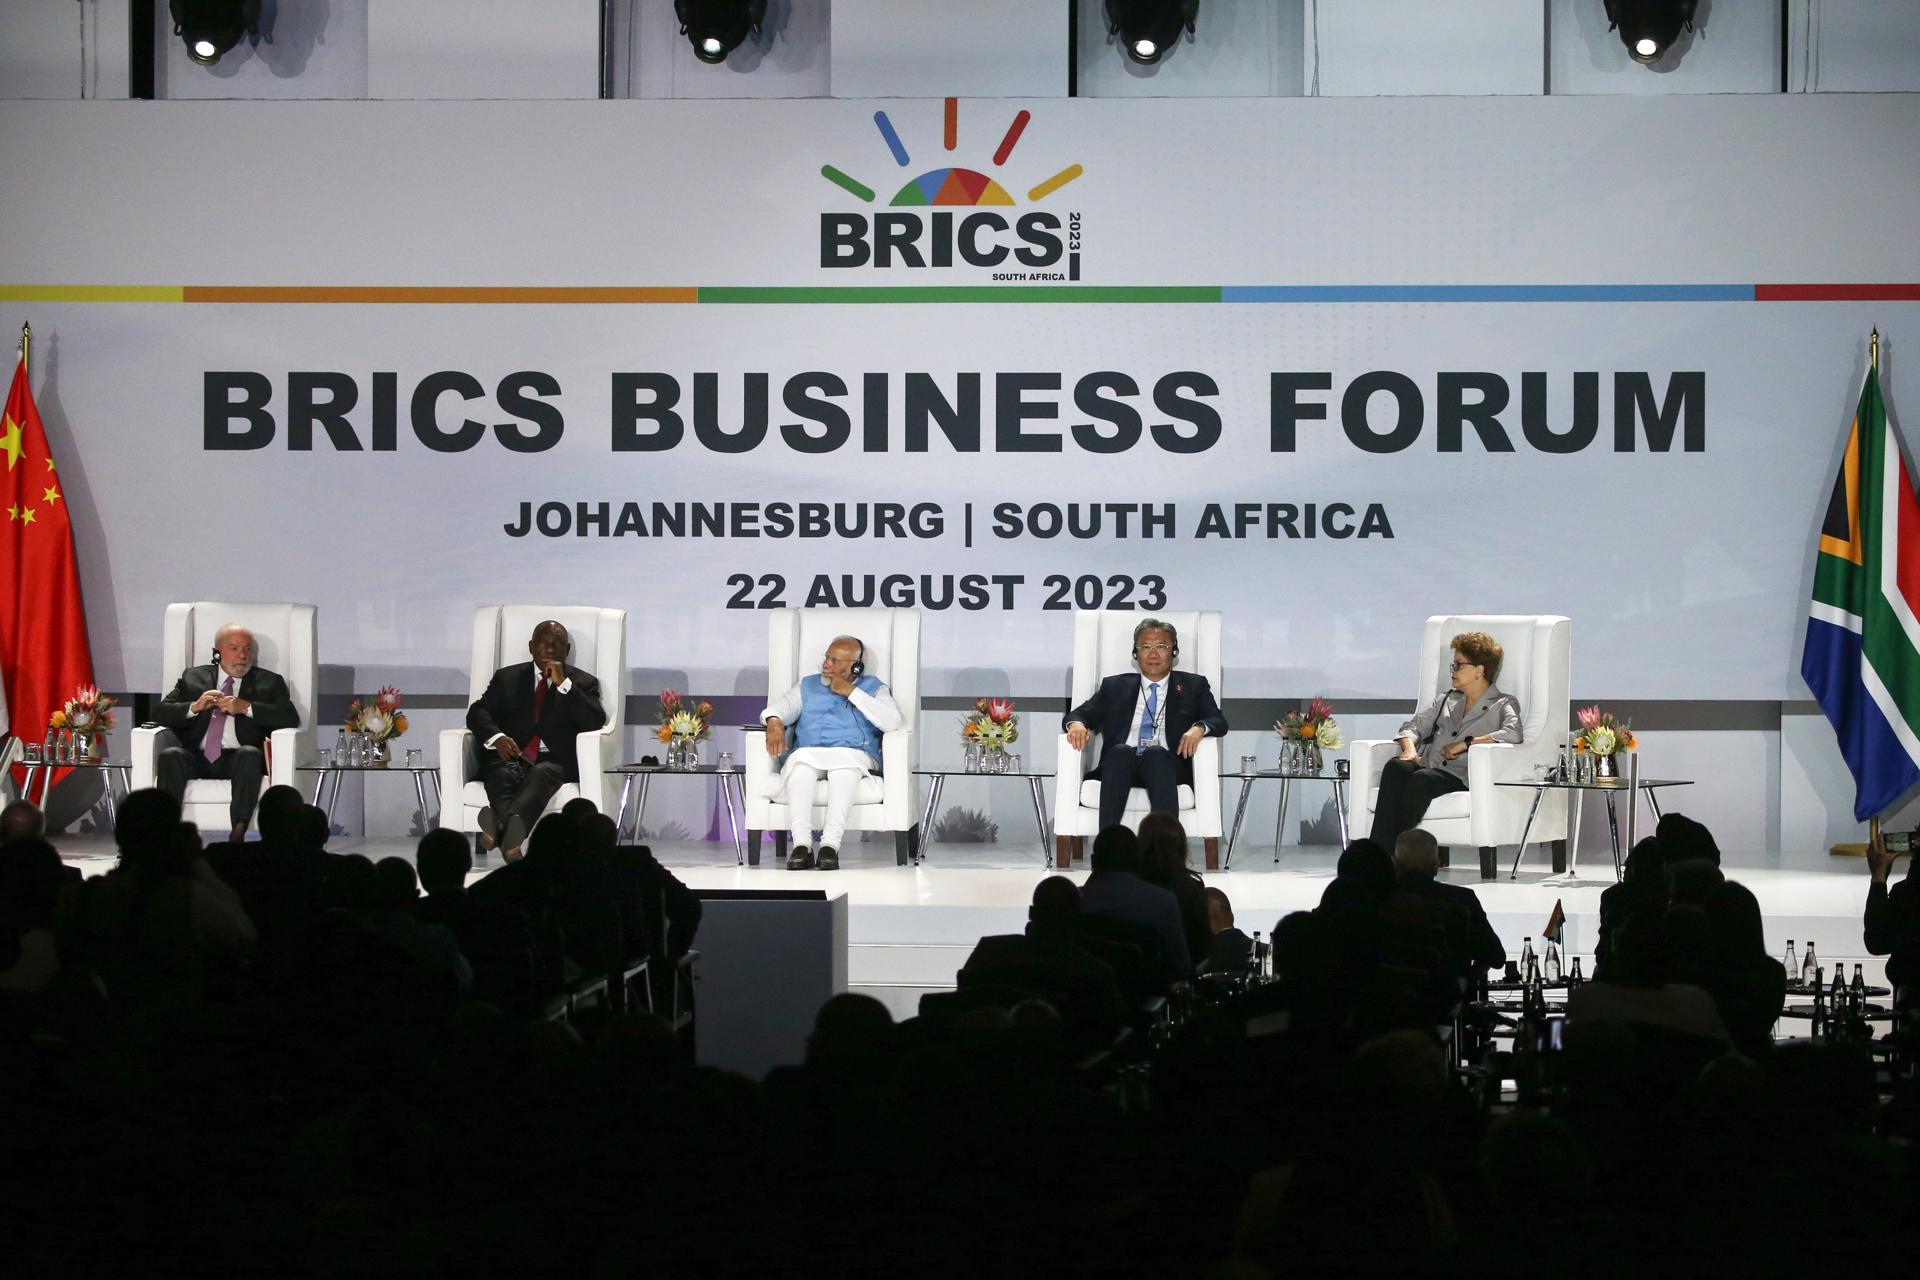 President of Brazil Luiz Inacio Lula da Silva, (L), South African President Cyril Ramaphosa, (2L), Prime Minister of India Narendra Modi, (C), China's Minister of Commerce Wang Wentao (2R), and chair of the New Development Bank and former President of Brazil Dilma Roussef (R) attend the start of the 15th BRICS Summit, in Johannesburg, South Africa, 22 August 2023. EFE/EPA/KIM LUDBROOK